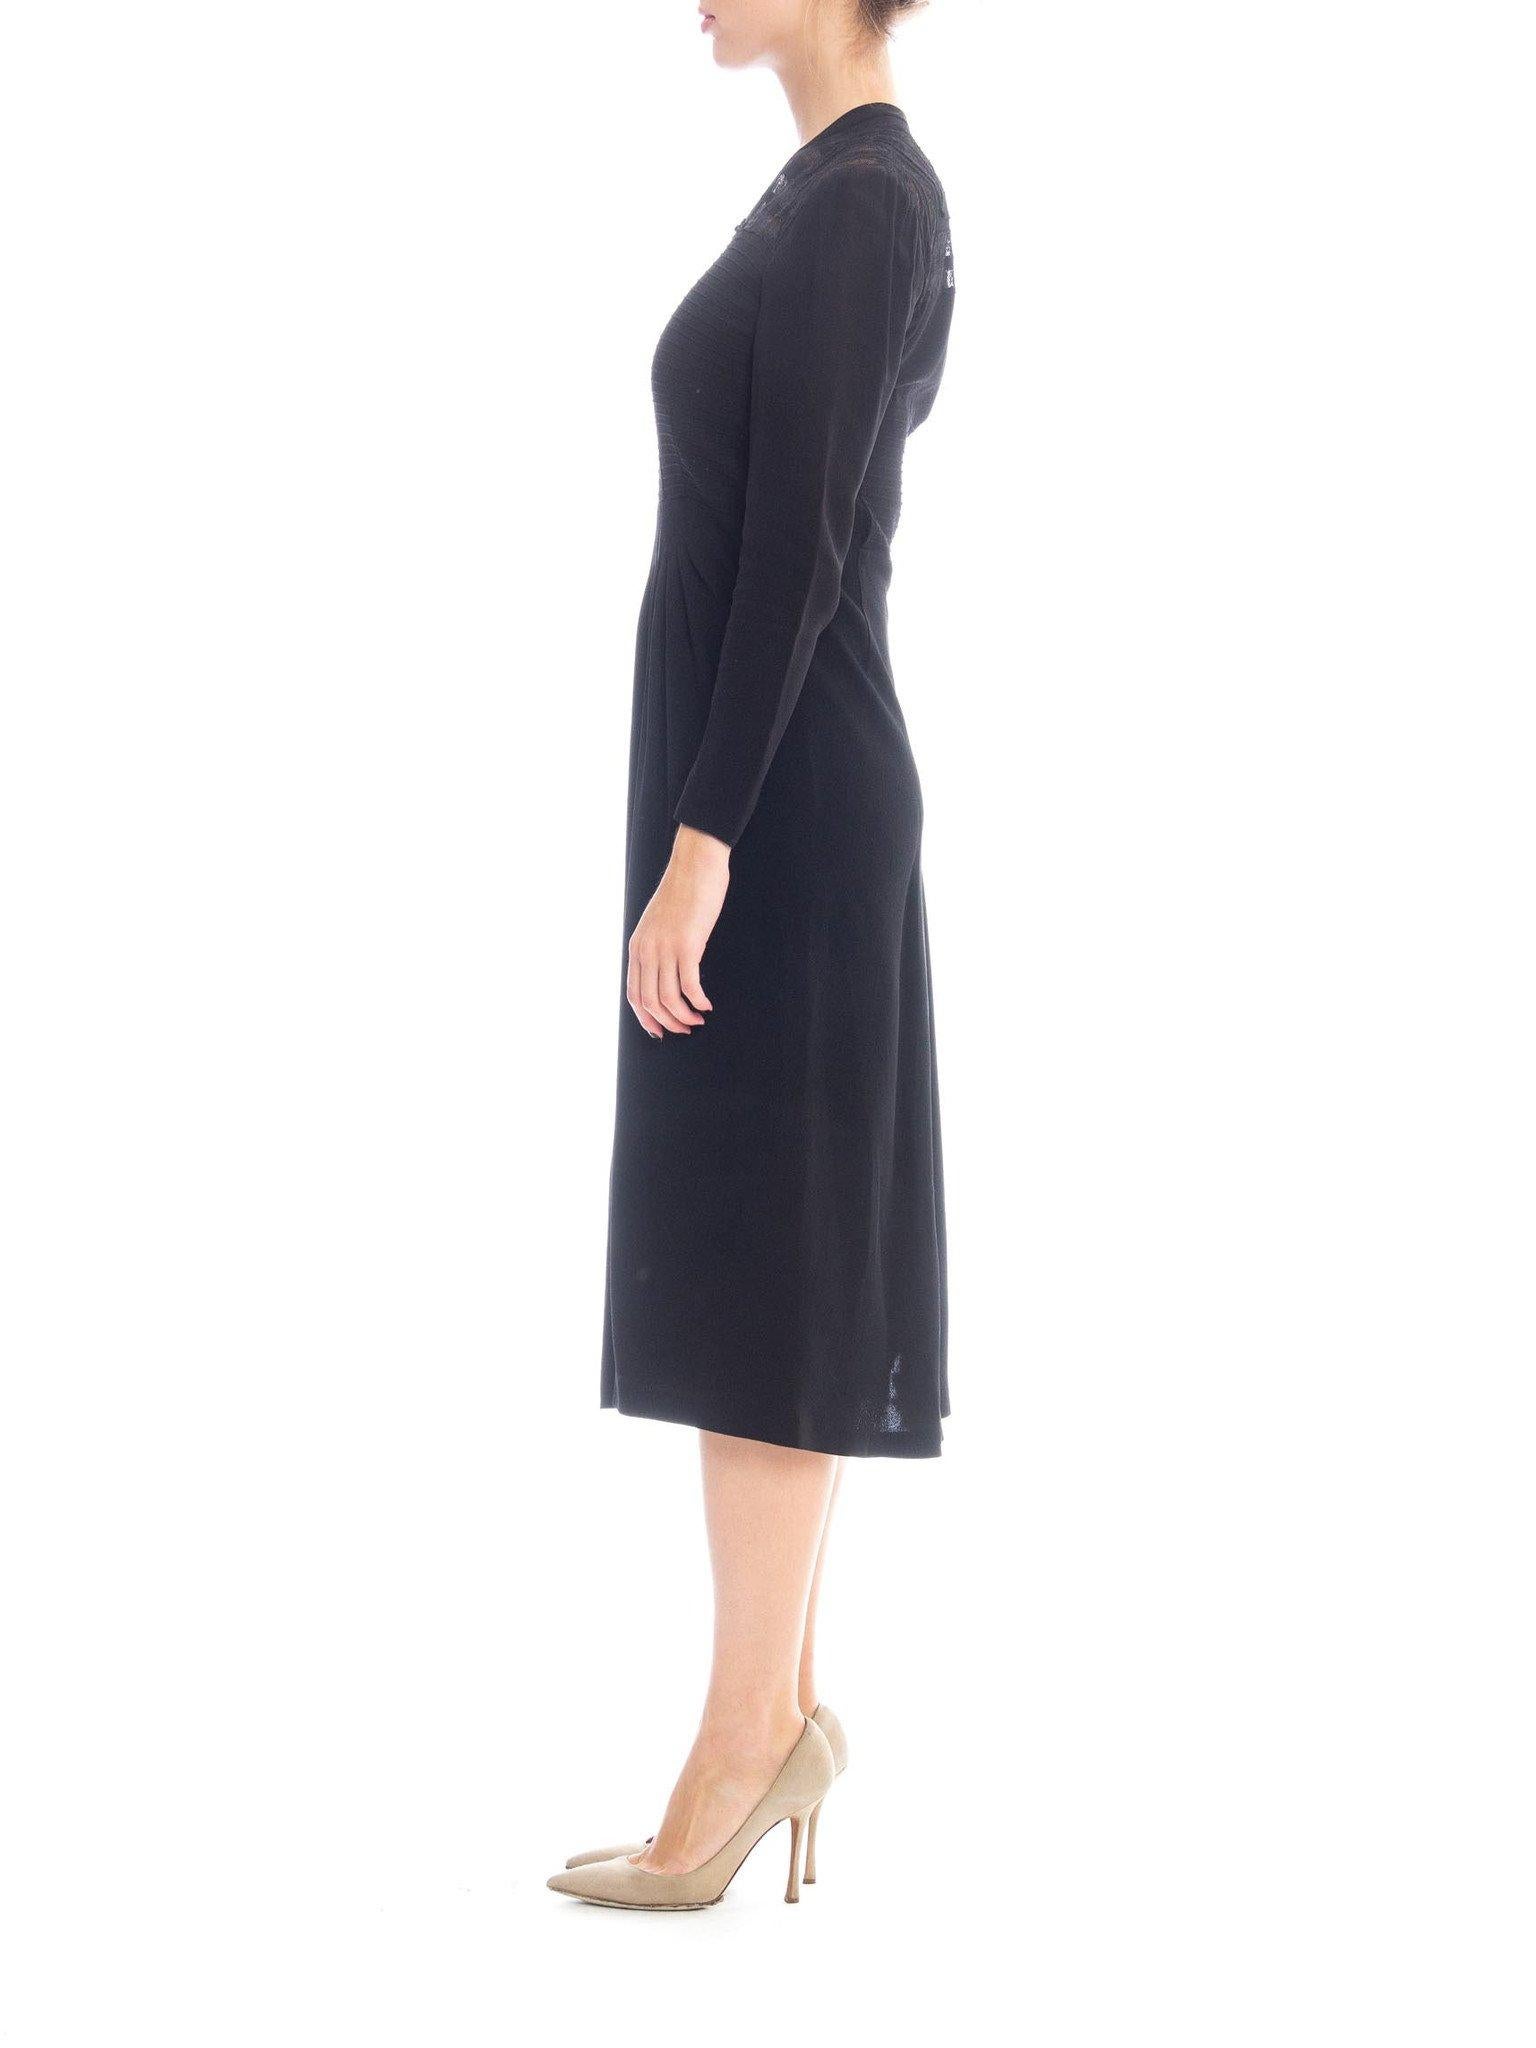 1940S Black Rayon Crepe Long Sleeve Dress With Lace Insertion & Pin Tucked Bodi For Sale 1